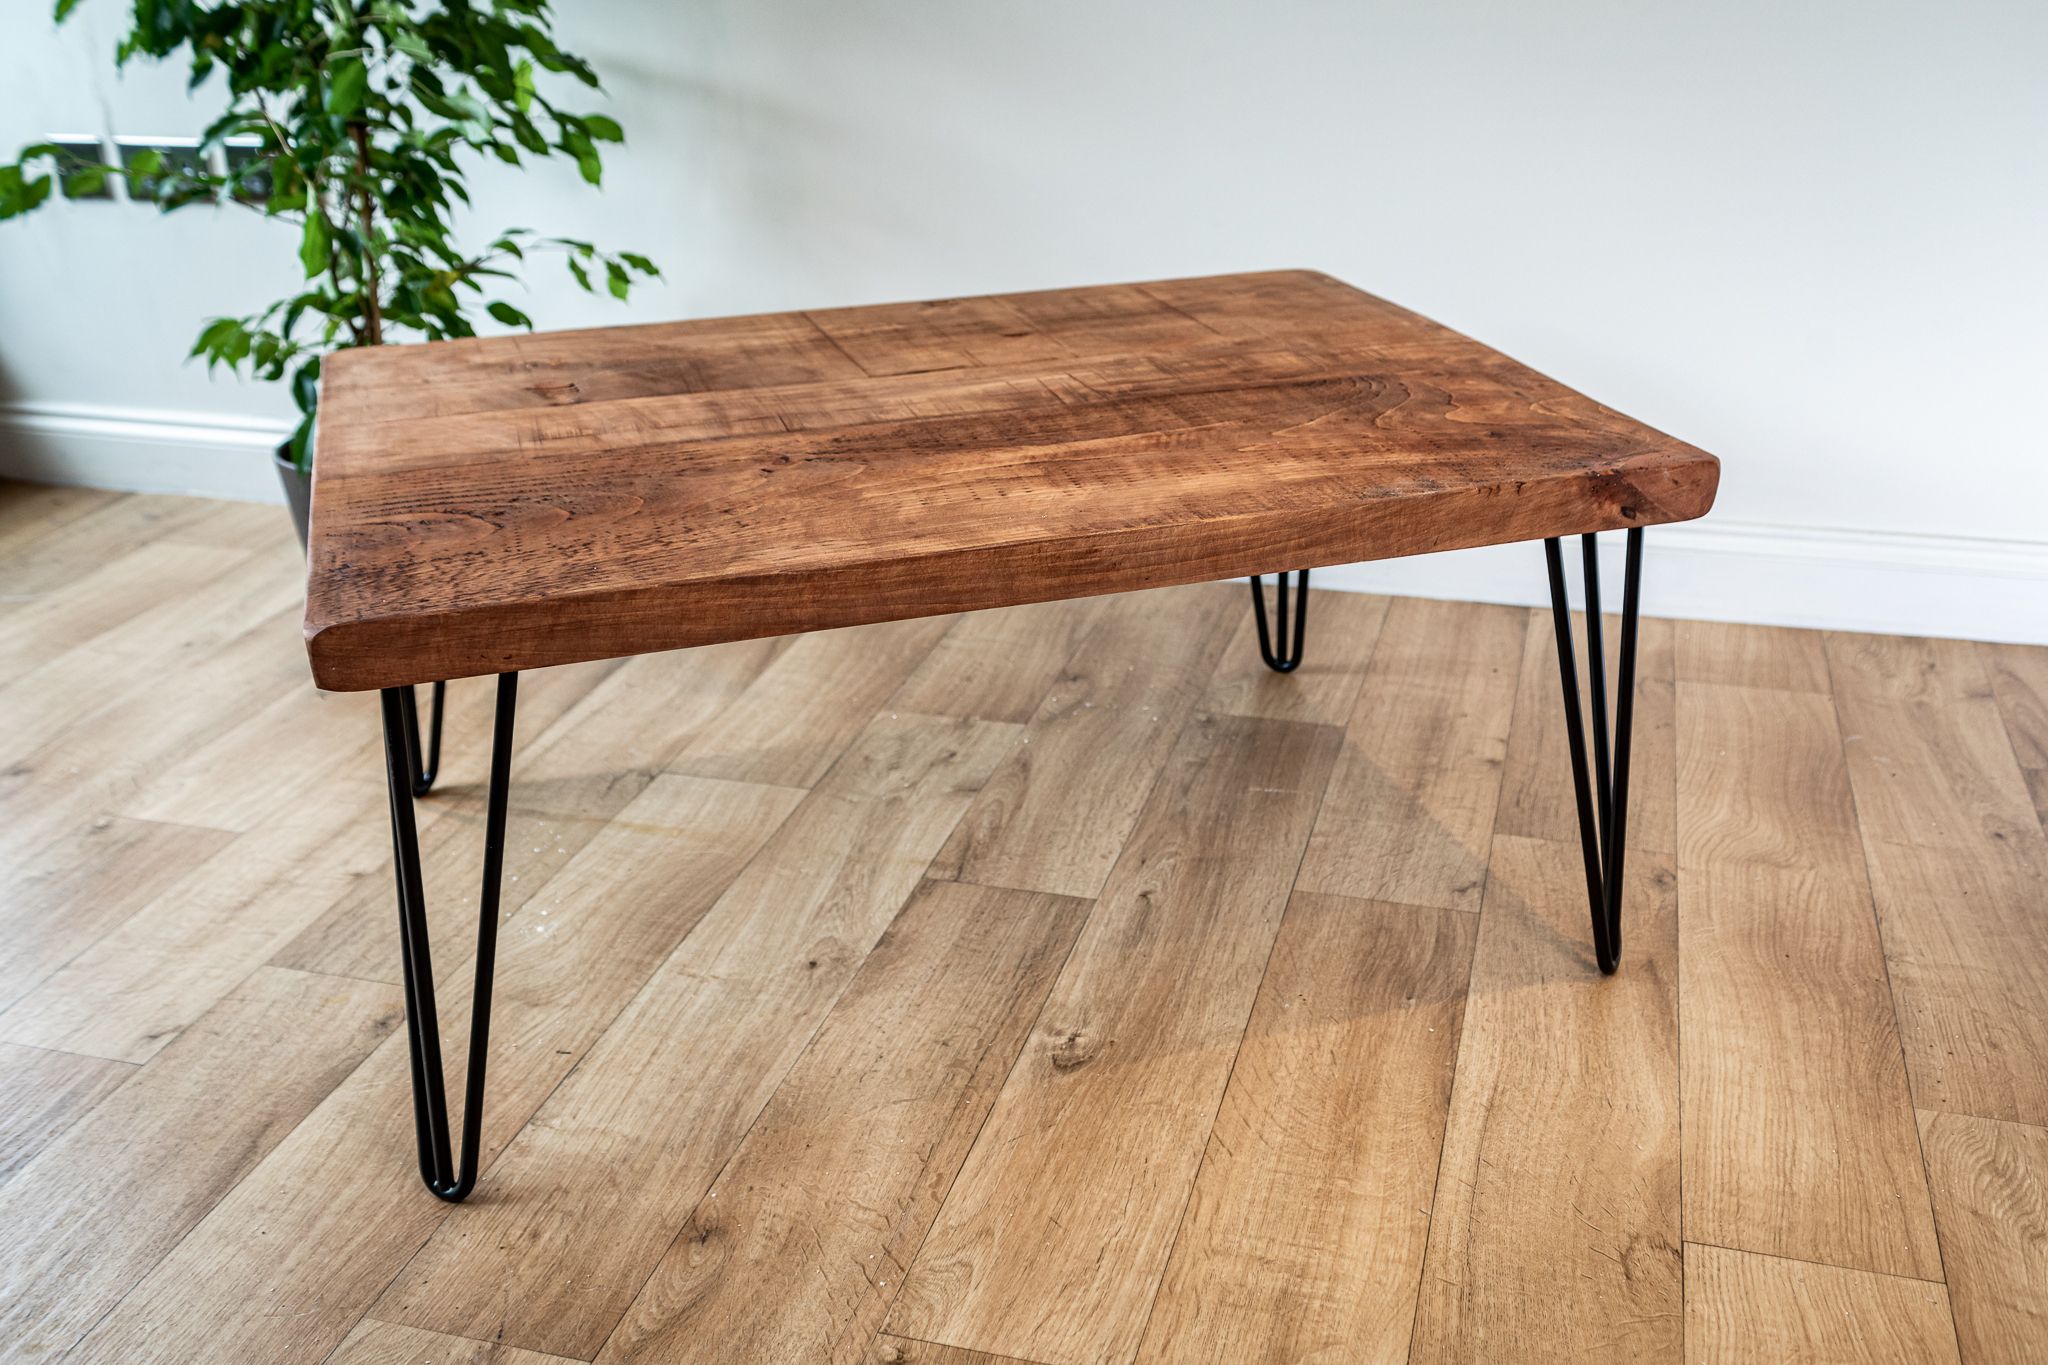 Hairpin Leg Coffee Table – Rustic Reclaimed Plank Wood Top In Well Known Heartwood Cherry Wood Coffee Tables (Gallery 13 of 20)